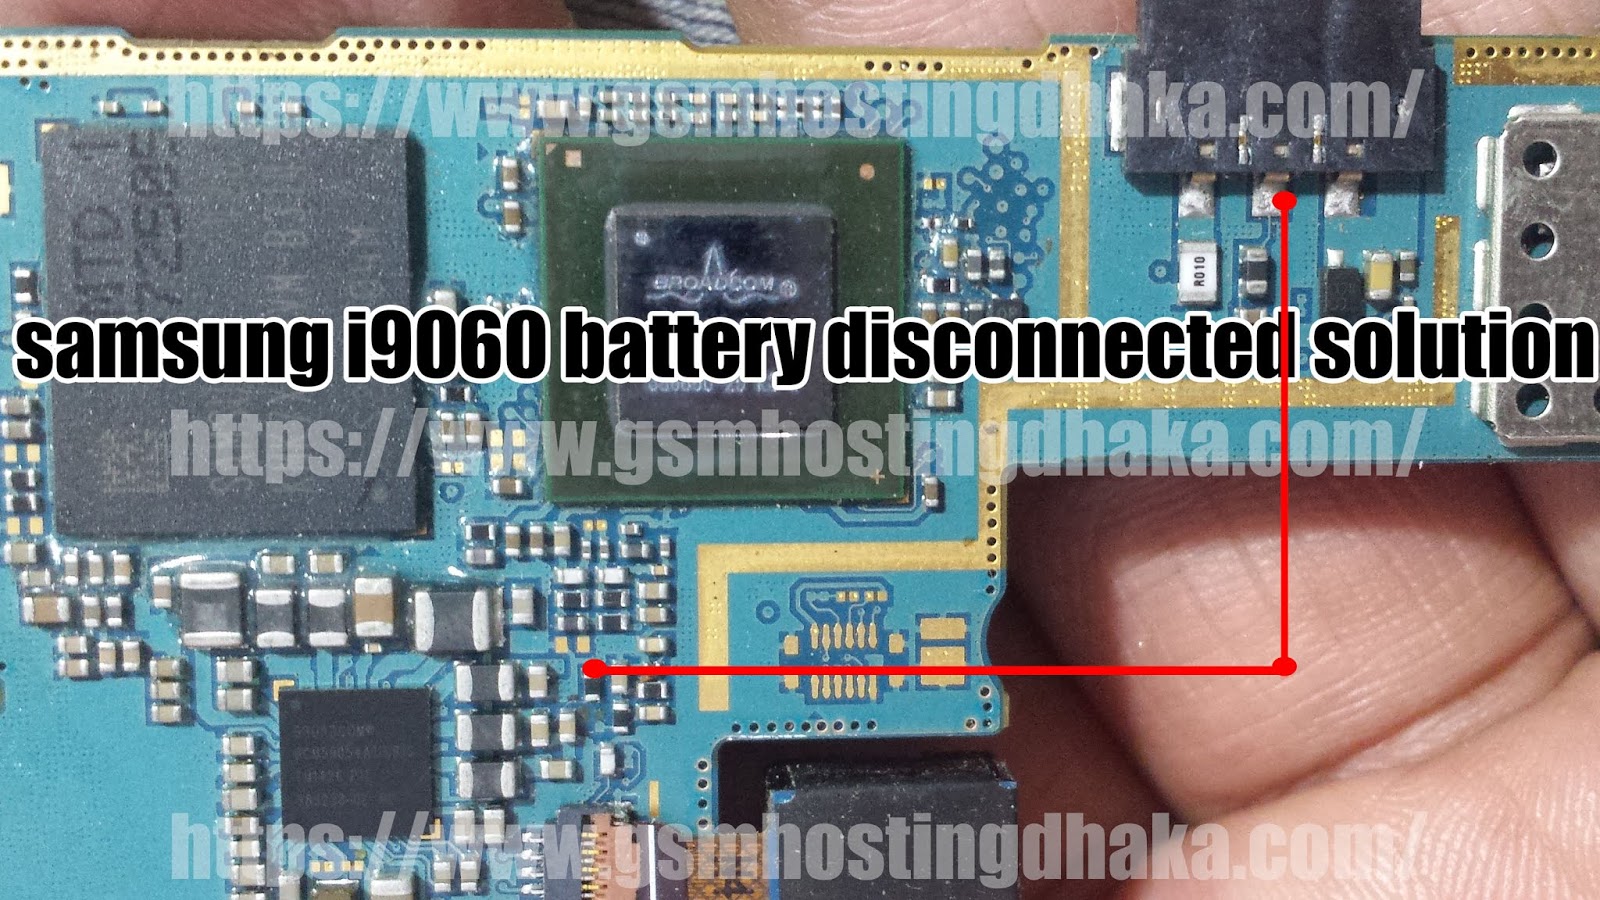 Samsung I9060 Battery Disconnected Solution Tested Frimwer